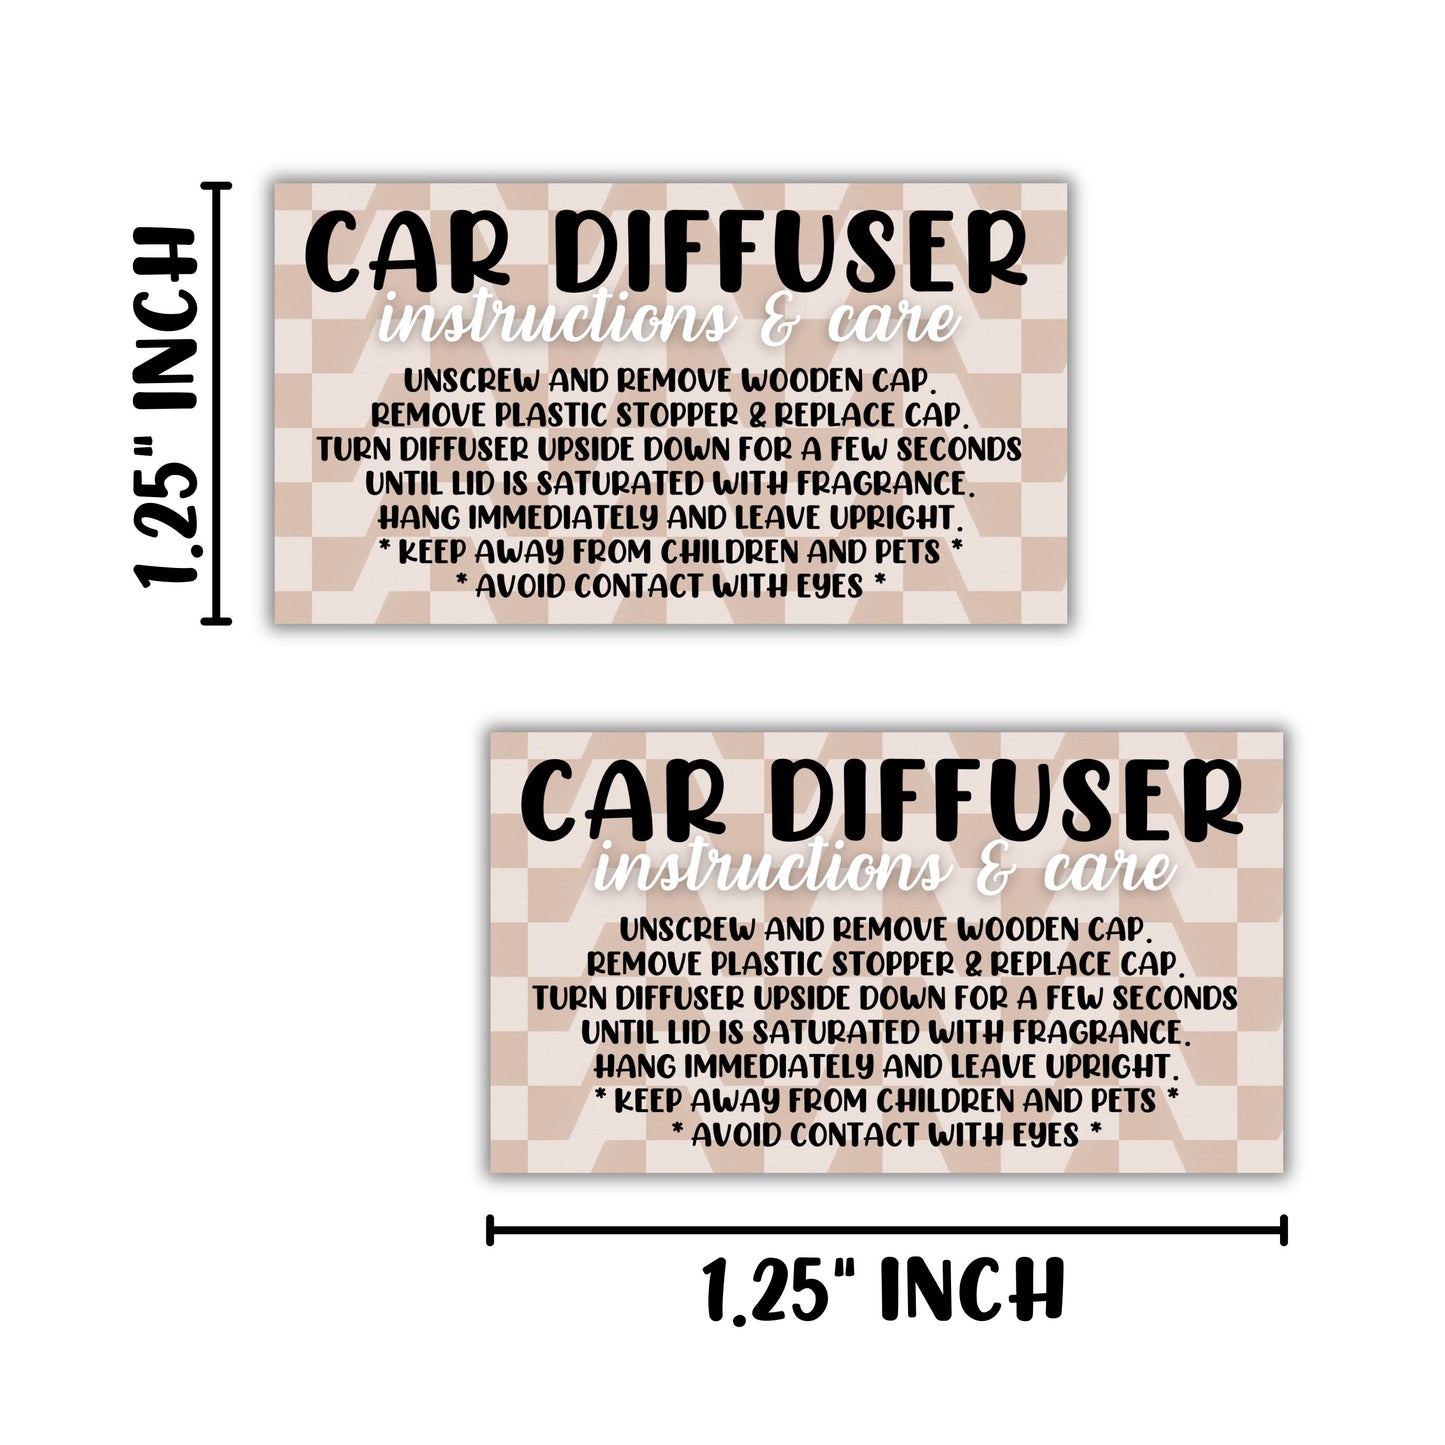 Car Oil Hanging Diffuser Care & Instructions Labels | 250 pc Roll 1.25” x 2.25”